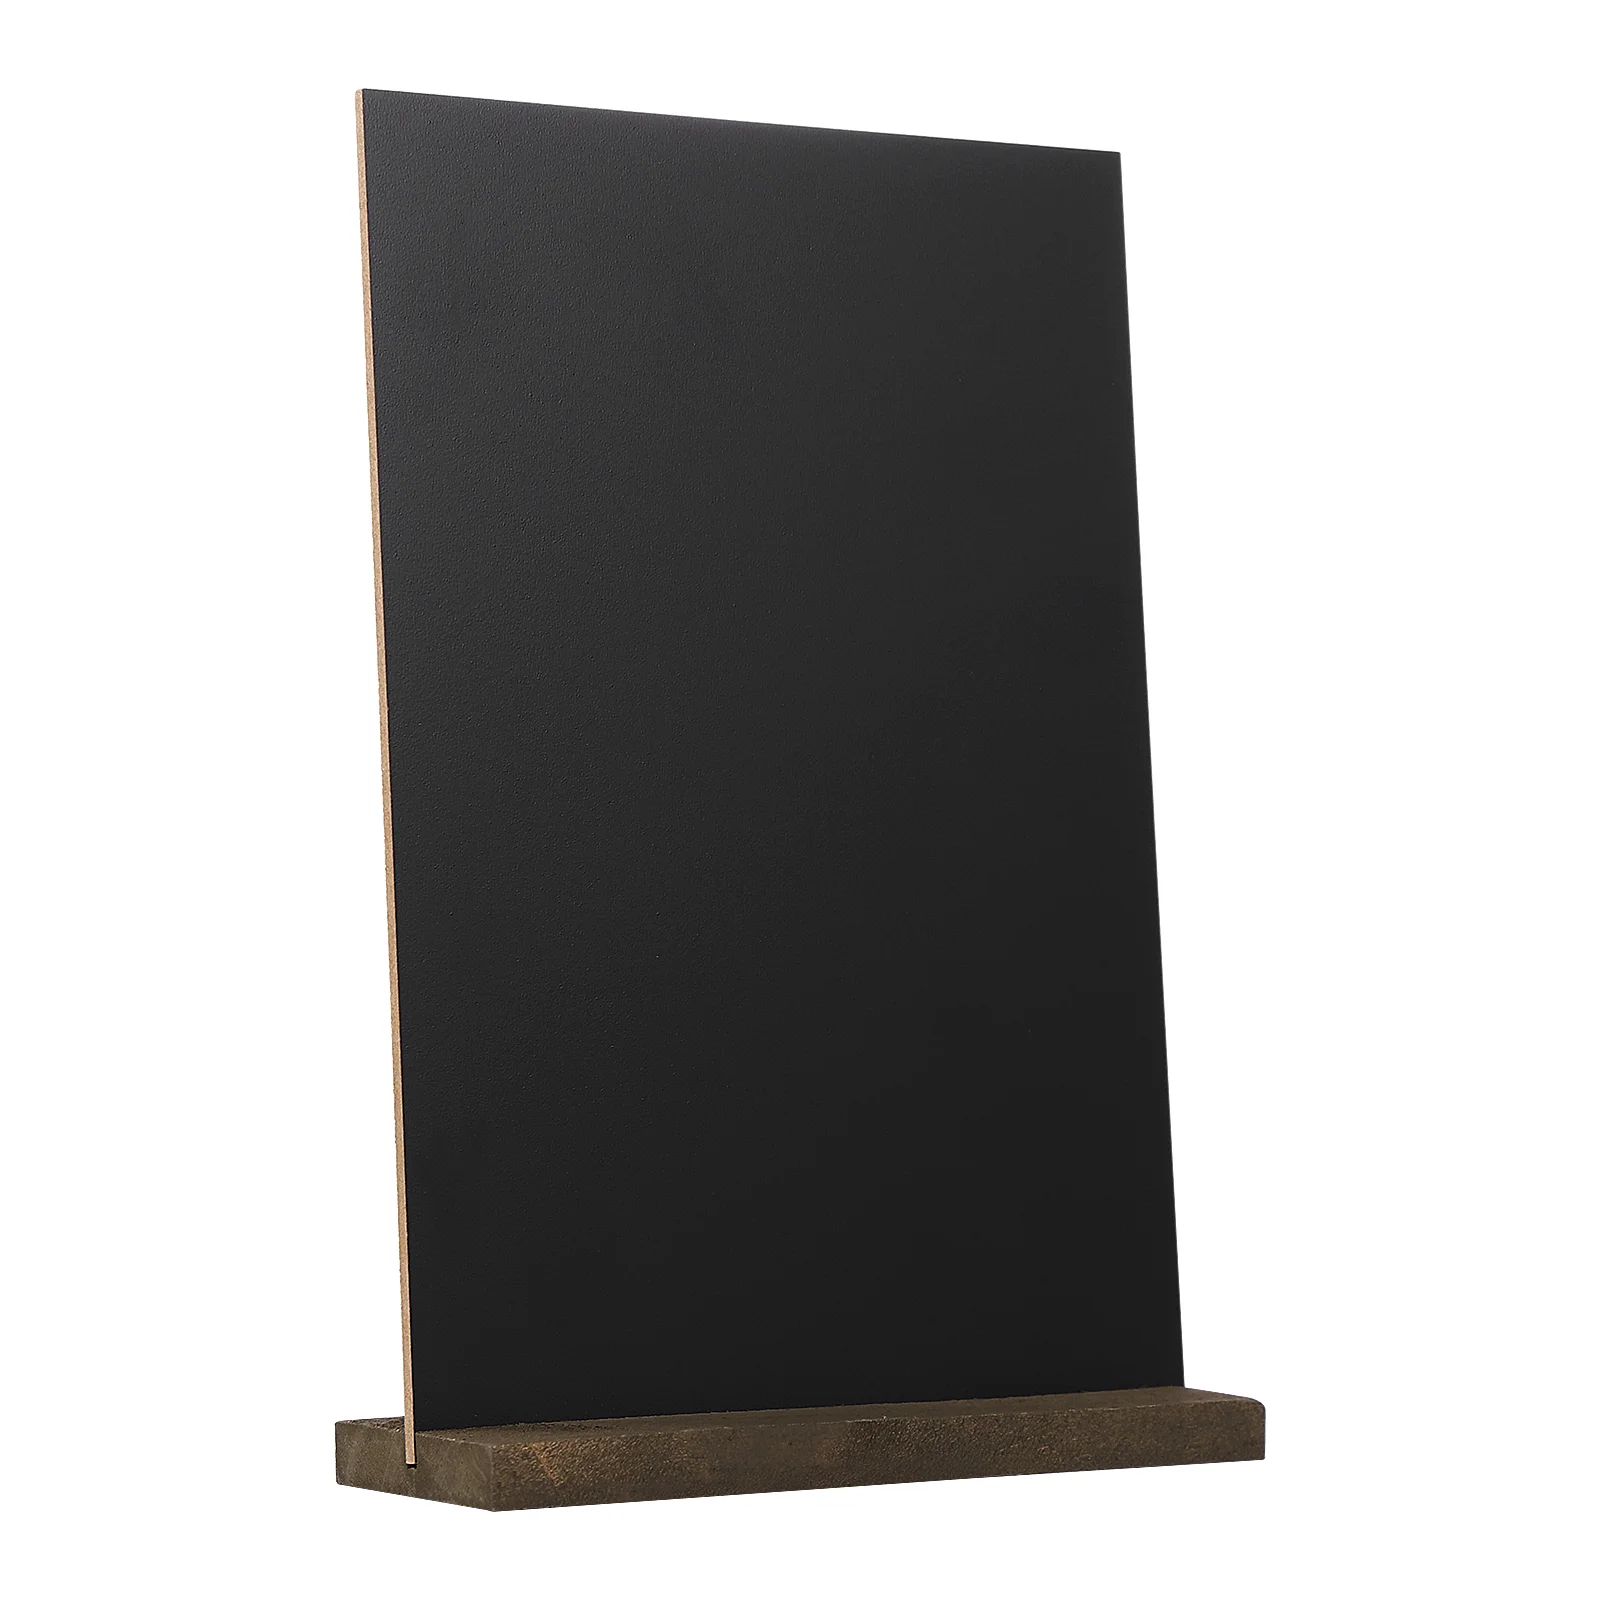 

VOSAREA Mini Chalk Board Sign Tabletop Double Sided Chalkboard Display Sign with Wood Base Message Board for Wedding Billboard